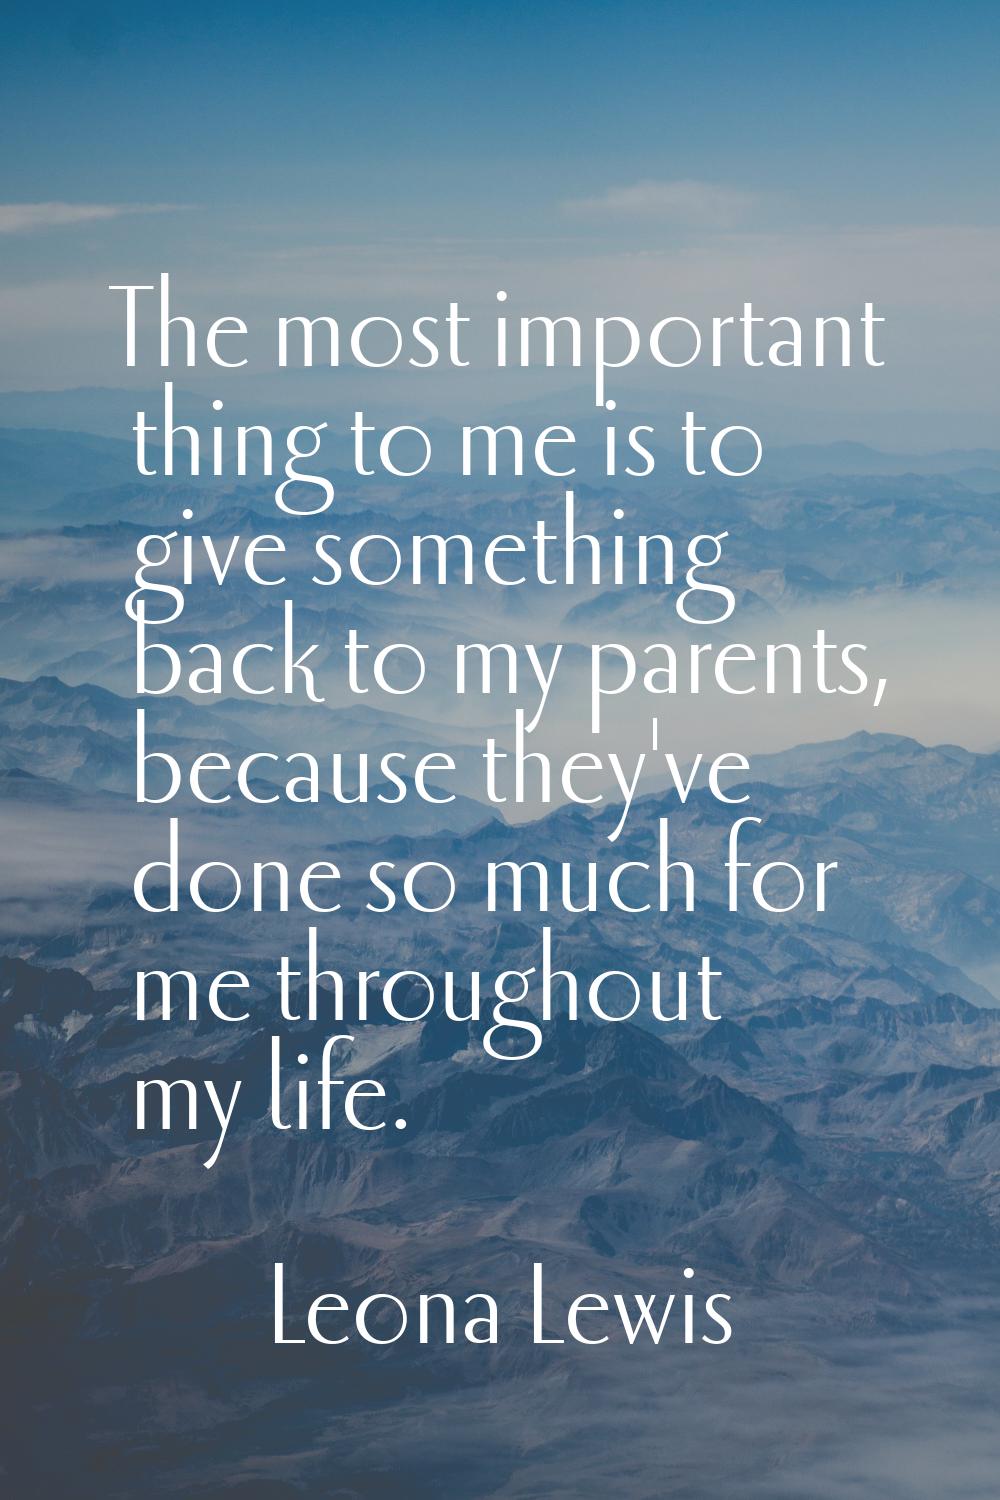 The most important thing to me is to give something back to my parents, because they've done so muc